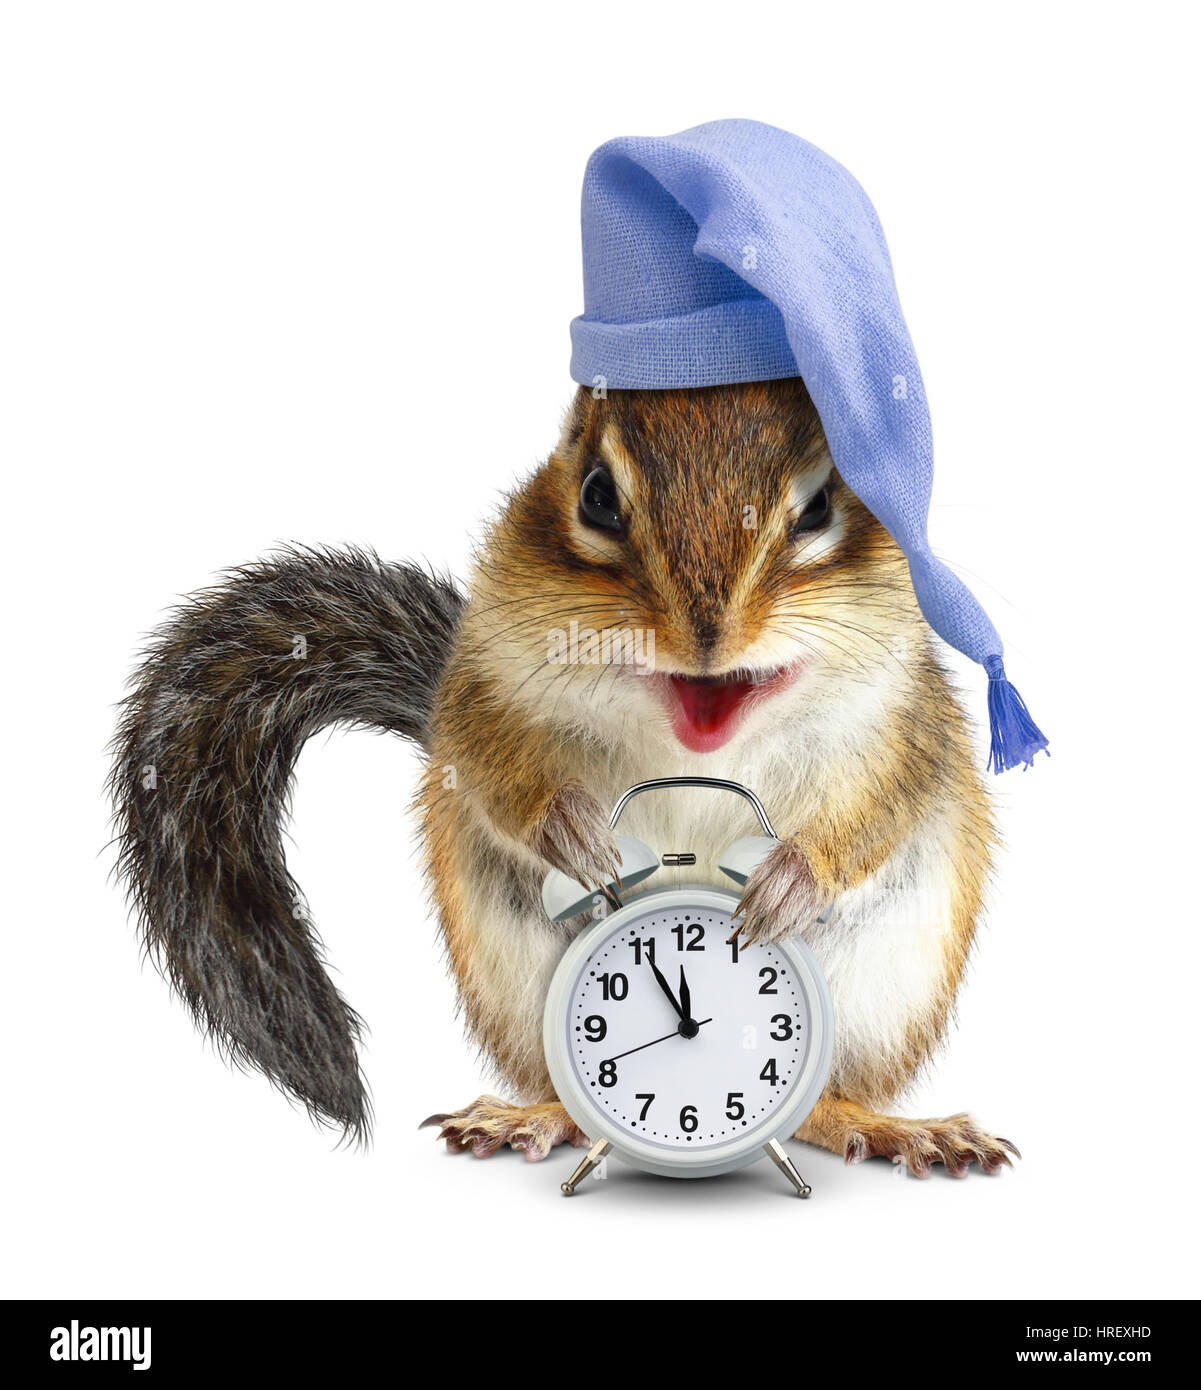 laughable animal chipmunk with clock and sleeping cap Stock Photo